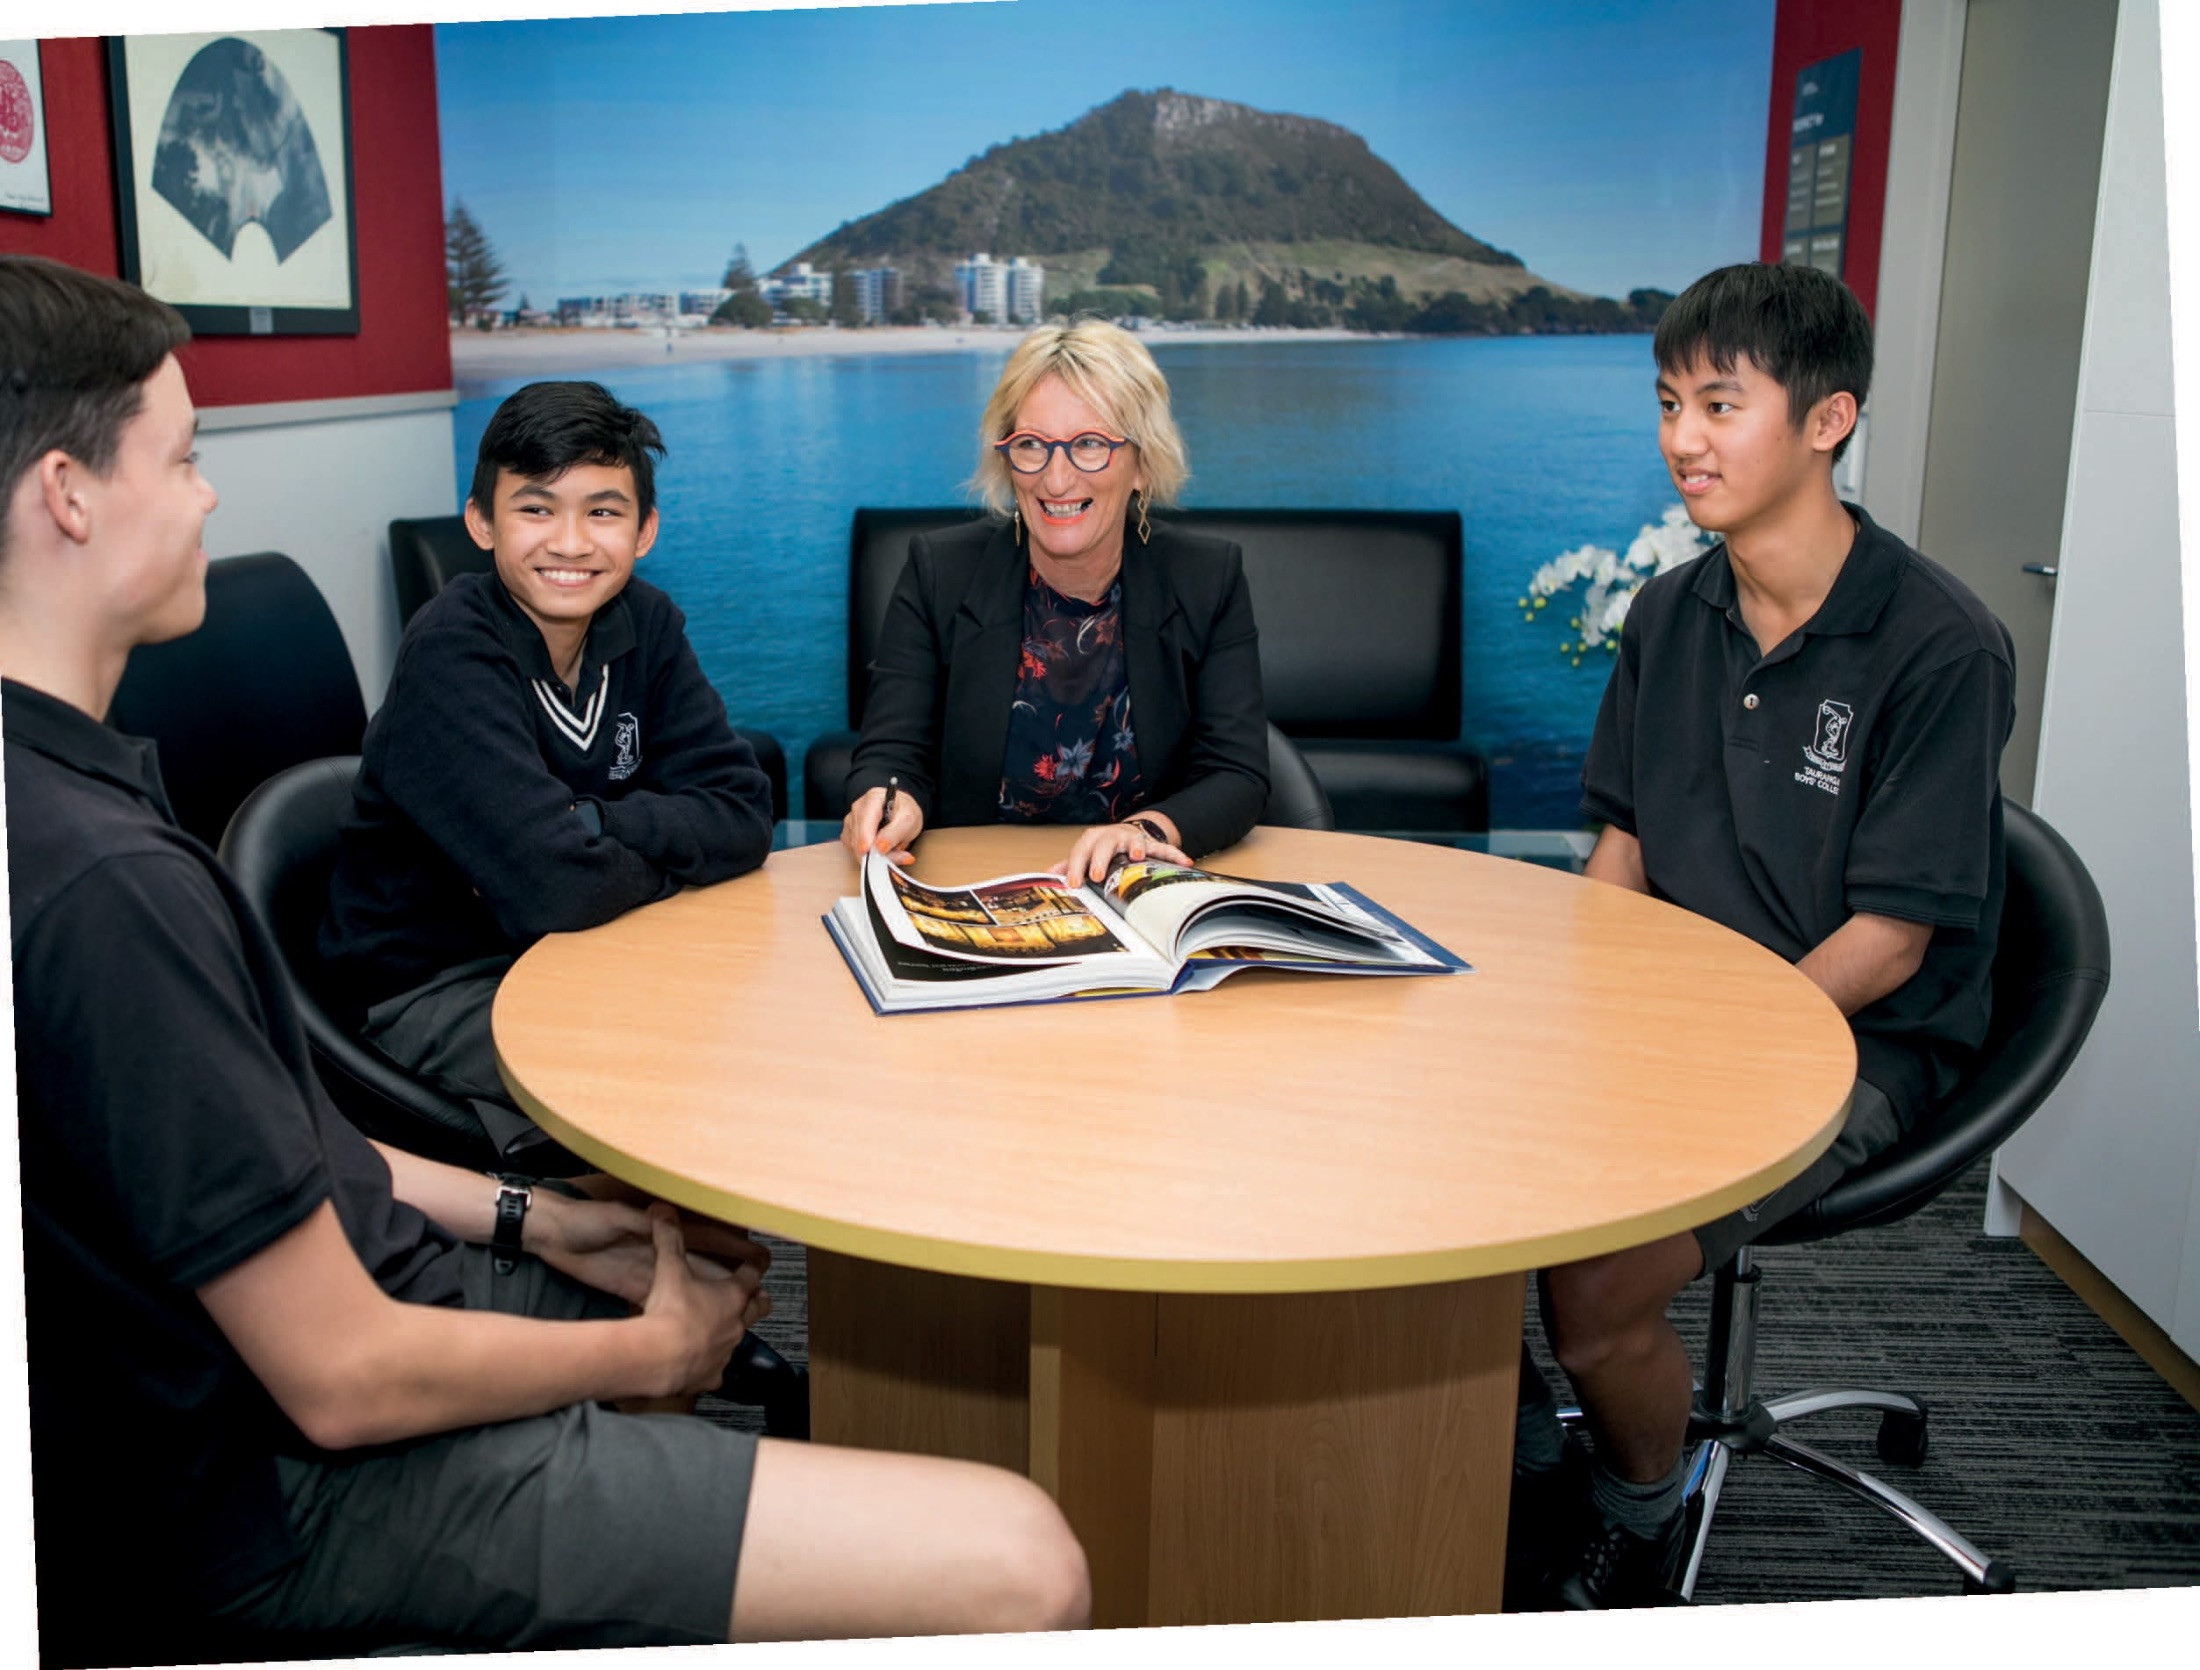 International - Our Community - About Us  -  Tauranga Boys' College